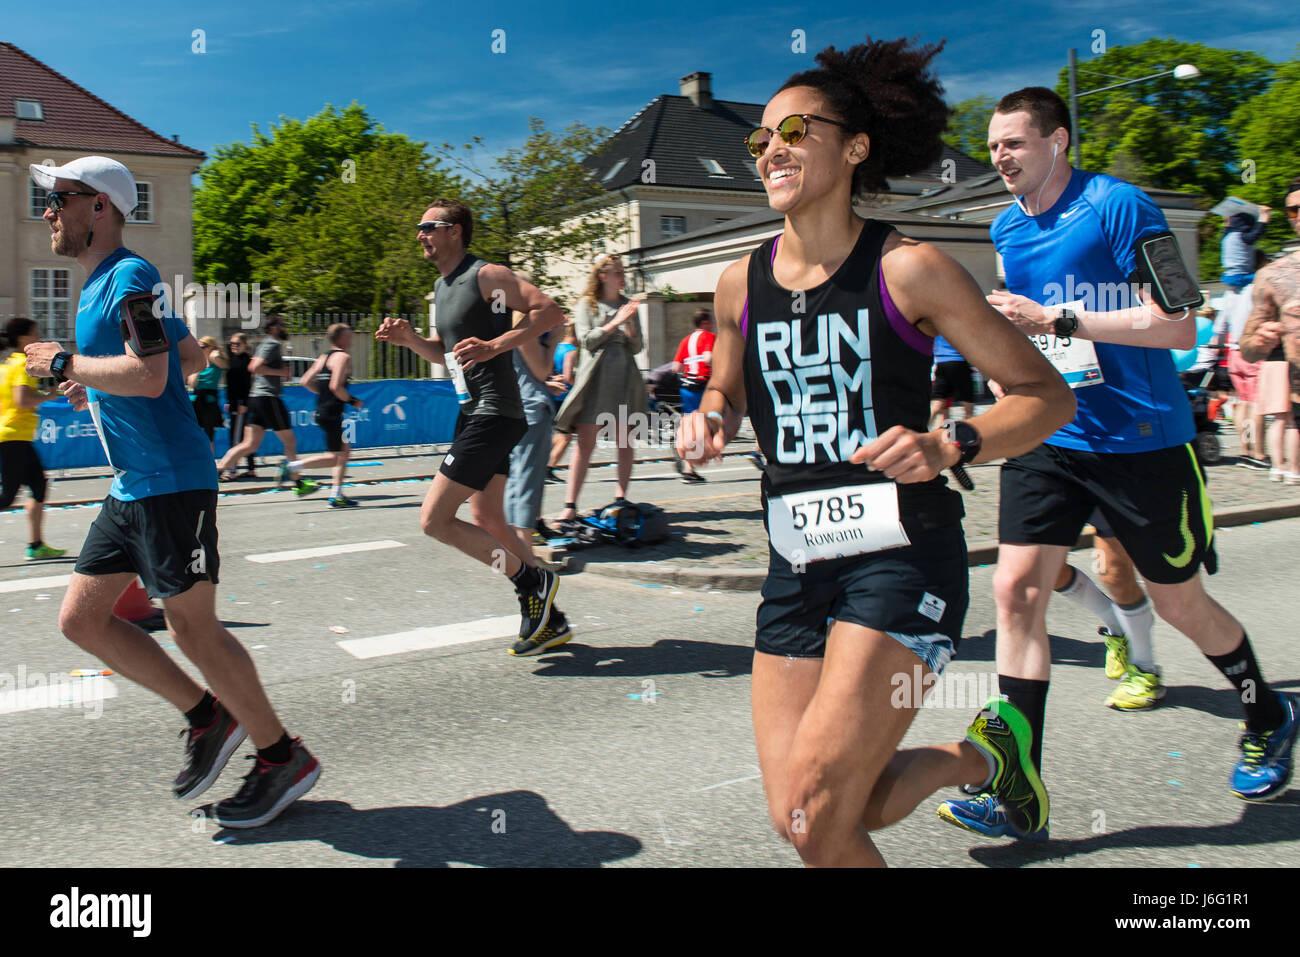 Copenhagen, Denmark. 21st May, 2017. More than 8500 runners from all over the world battled high temperatures to take part in the 2017 Telenor Copenhagen Marathon. Credit: Matthew James Harrison/Alamy Live News Stock Photo